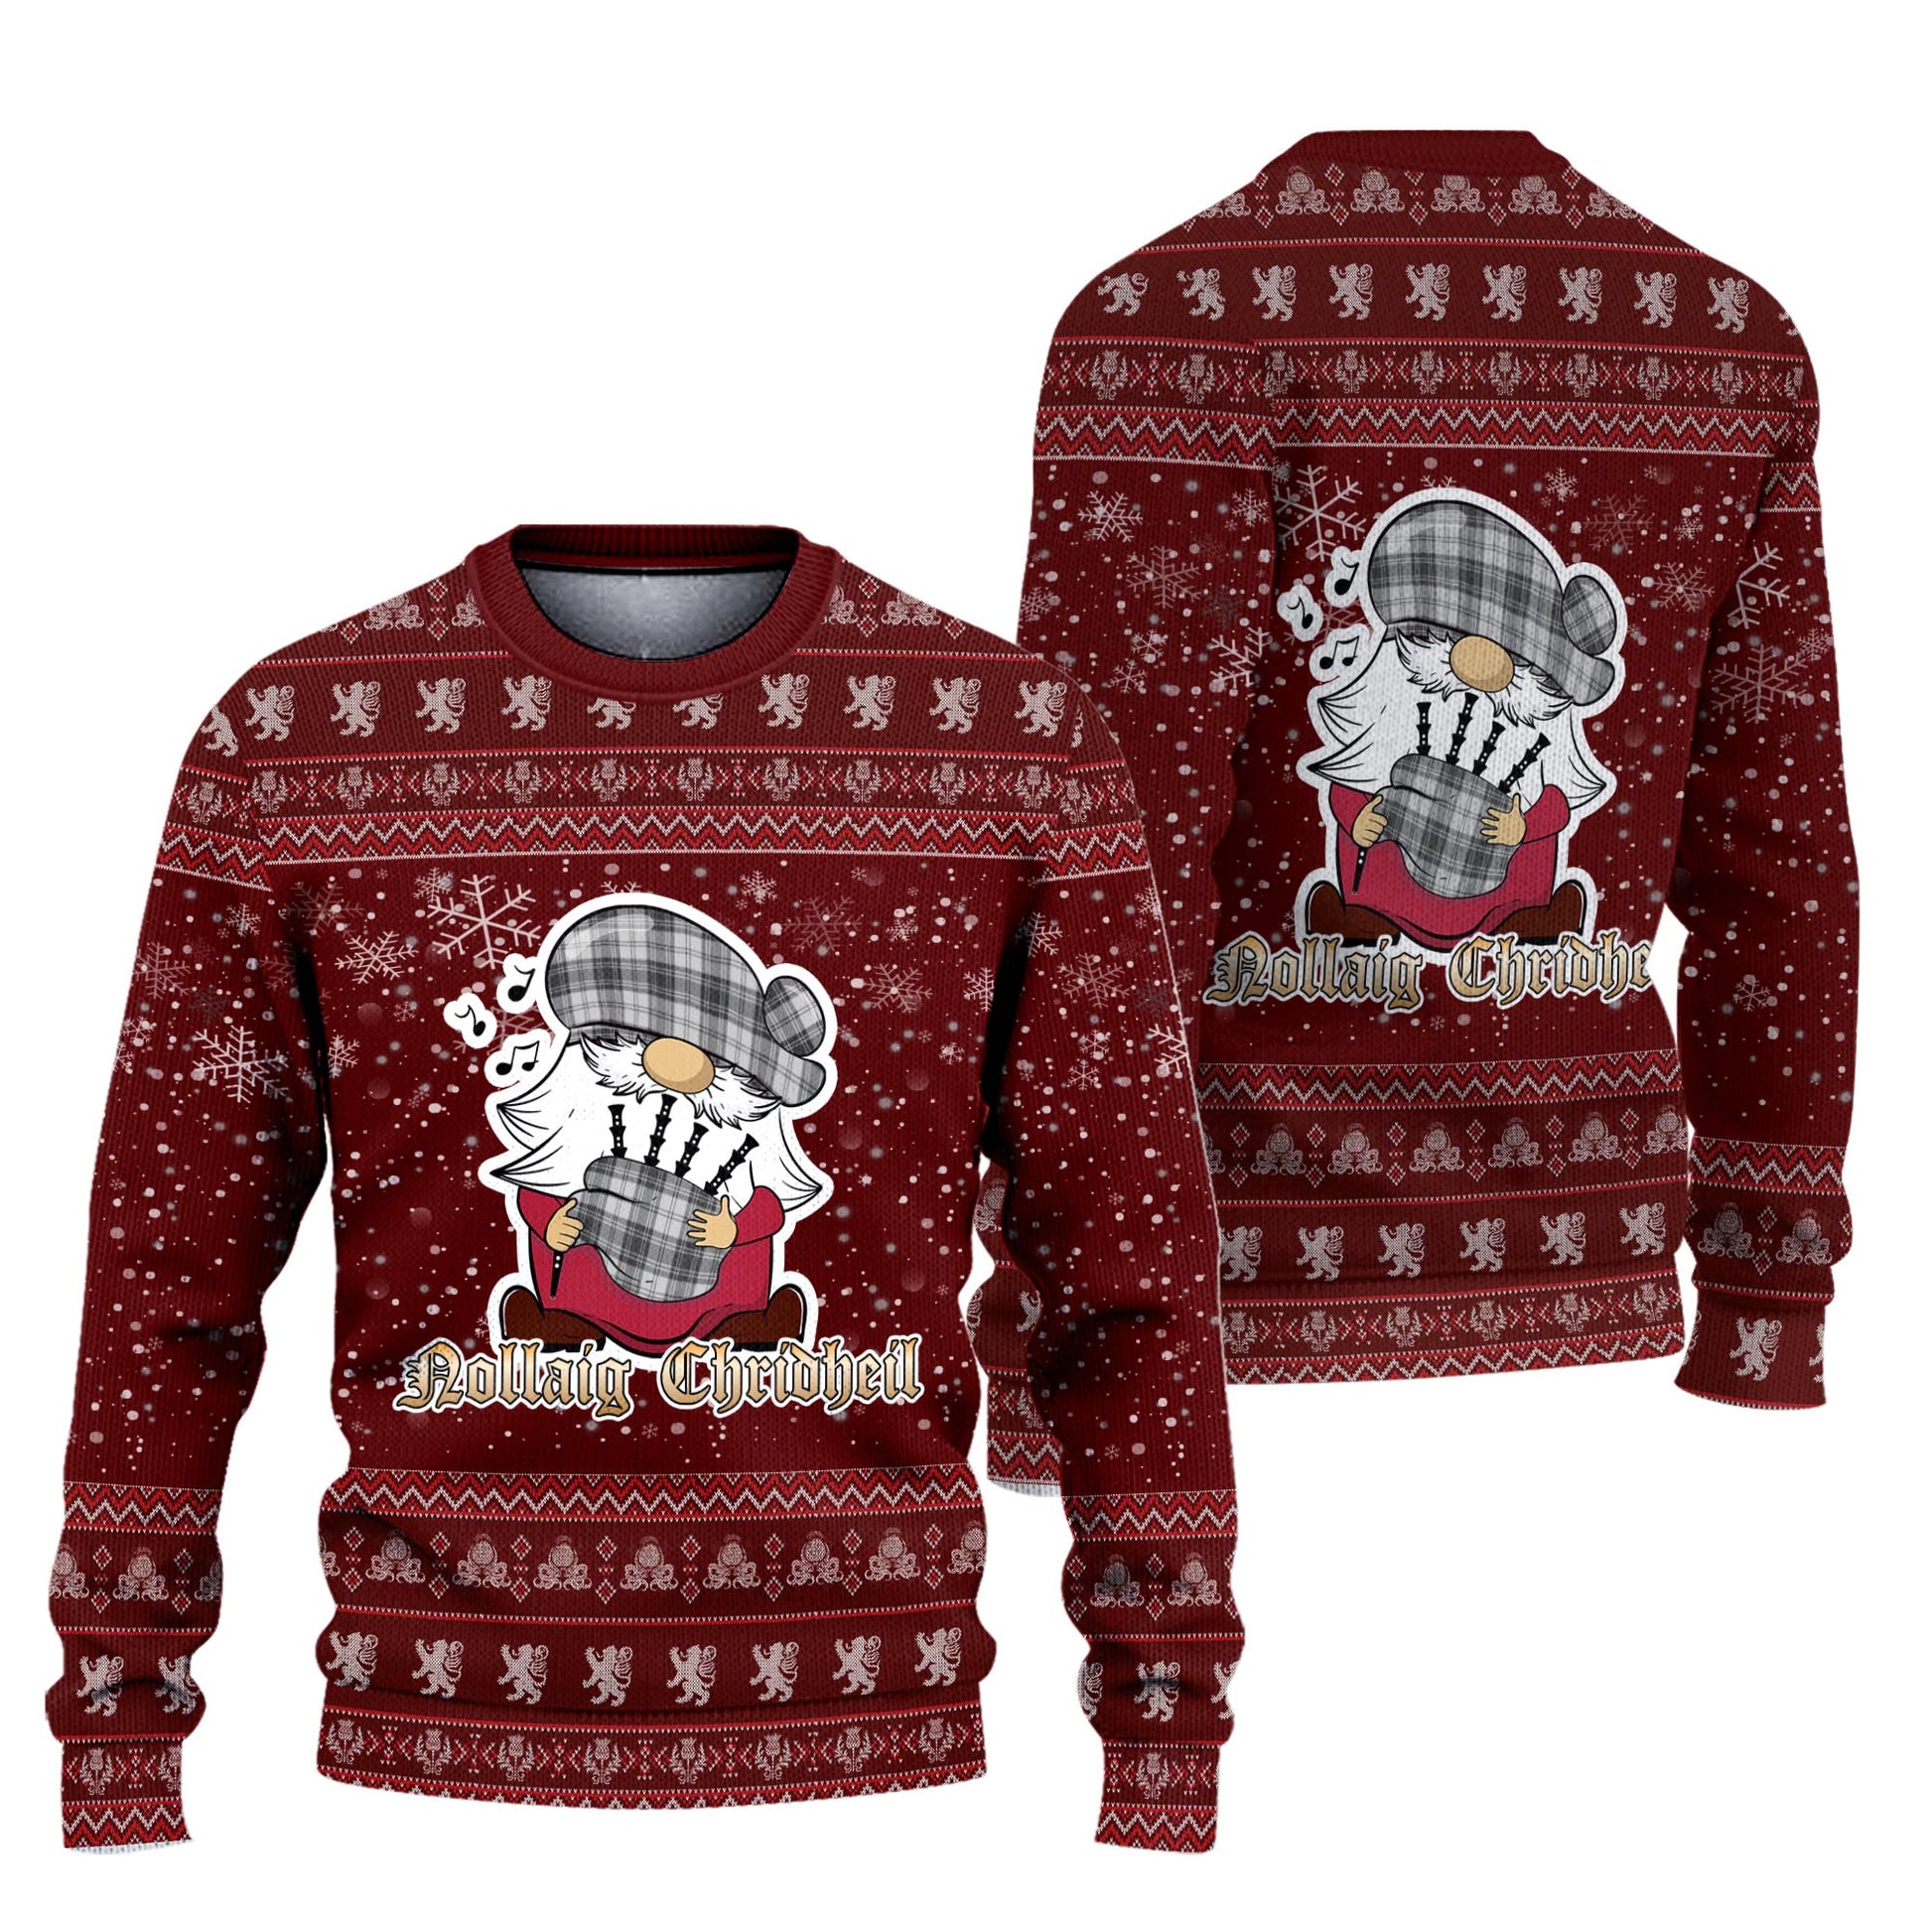 Glendinning Clan Christmas Family Knitted Sweater with Funny Gnome Playing Bagpipes Unisex Red - Tartanvibesclothing